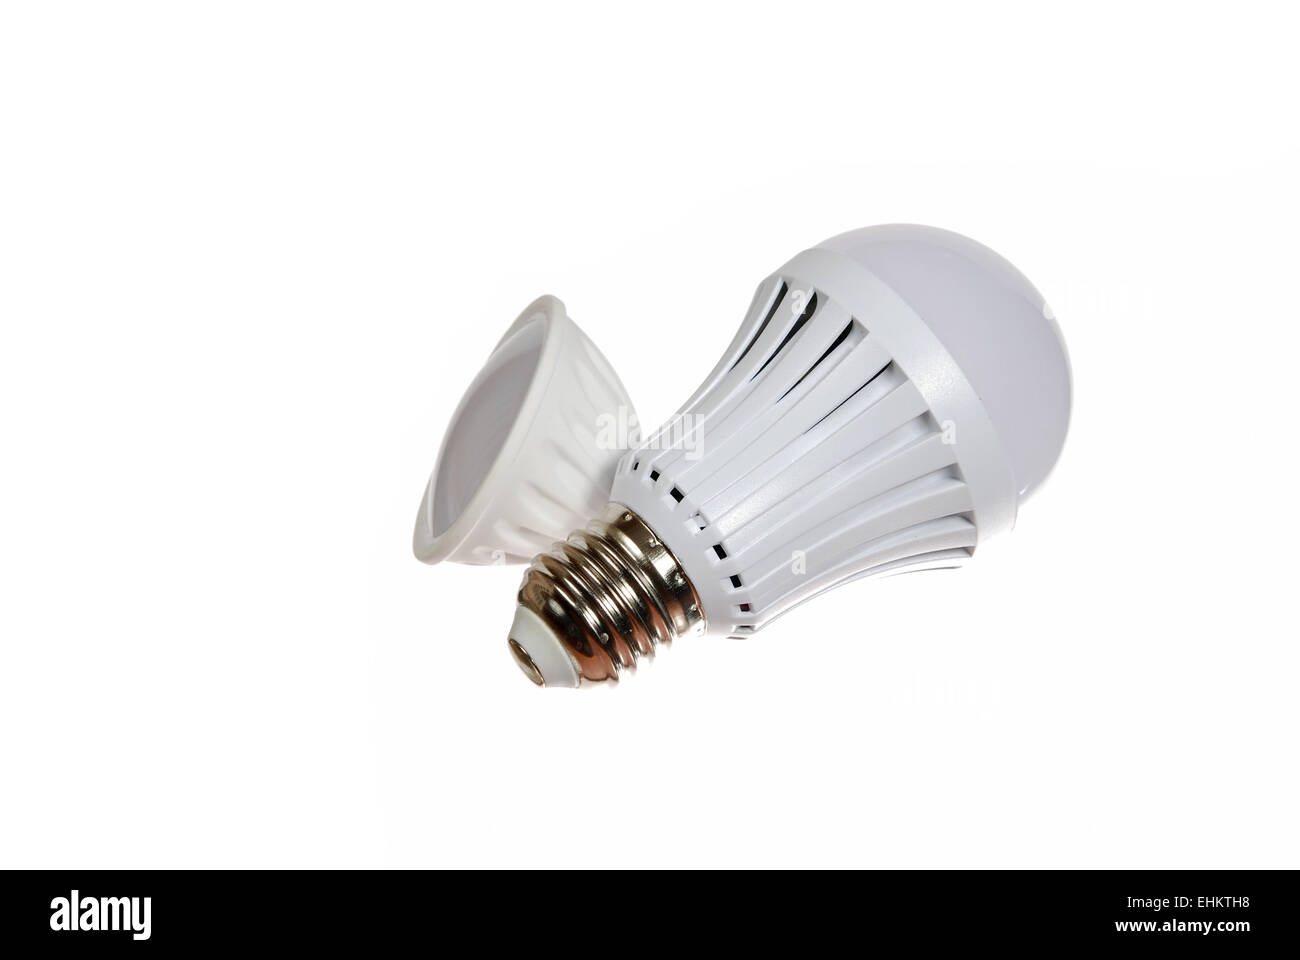 Led lamps are isolated on the white background Stock Photo